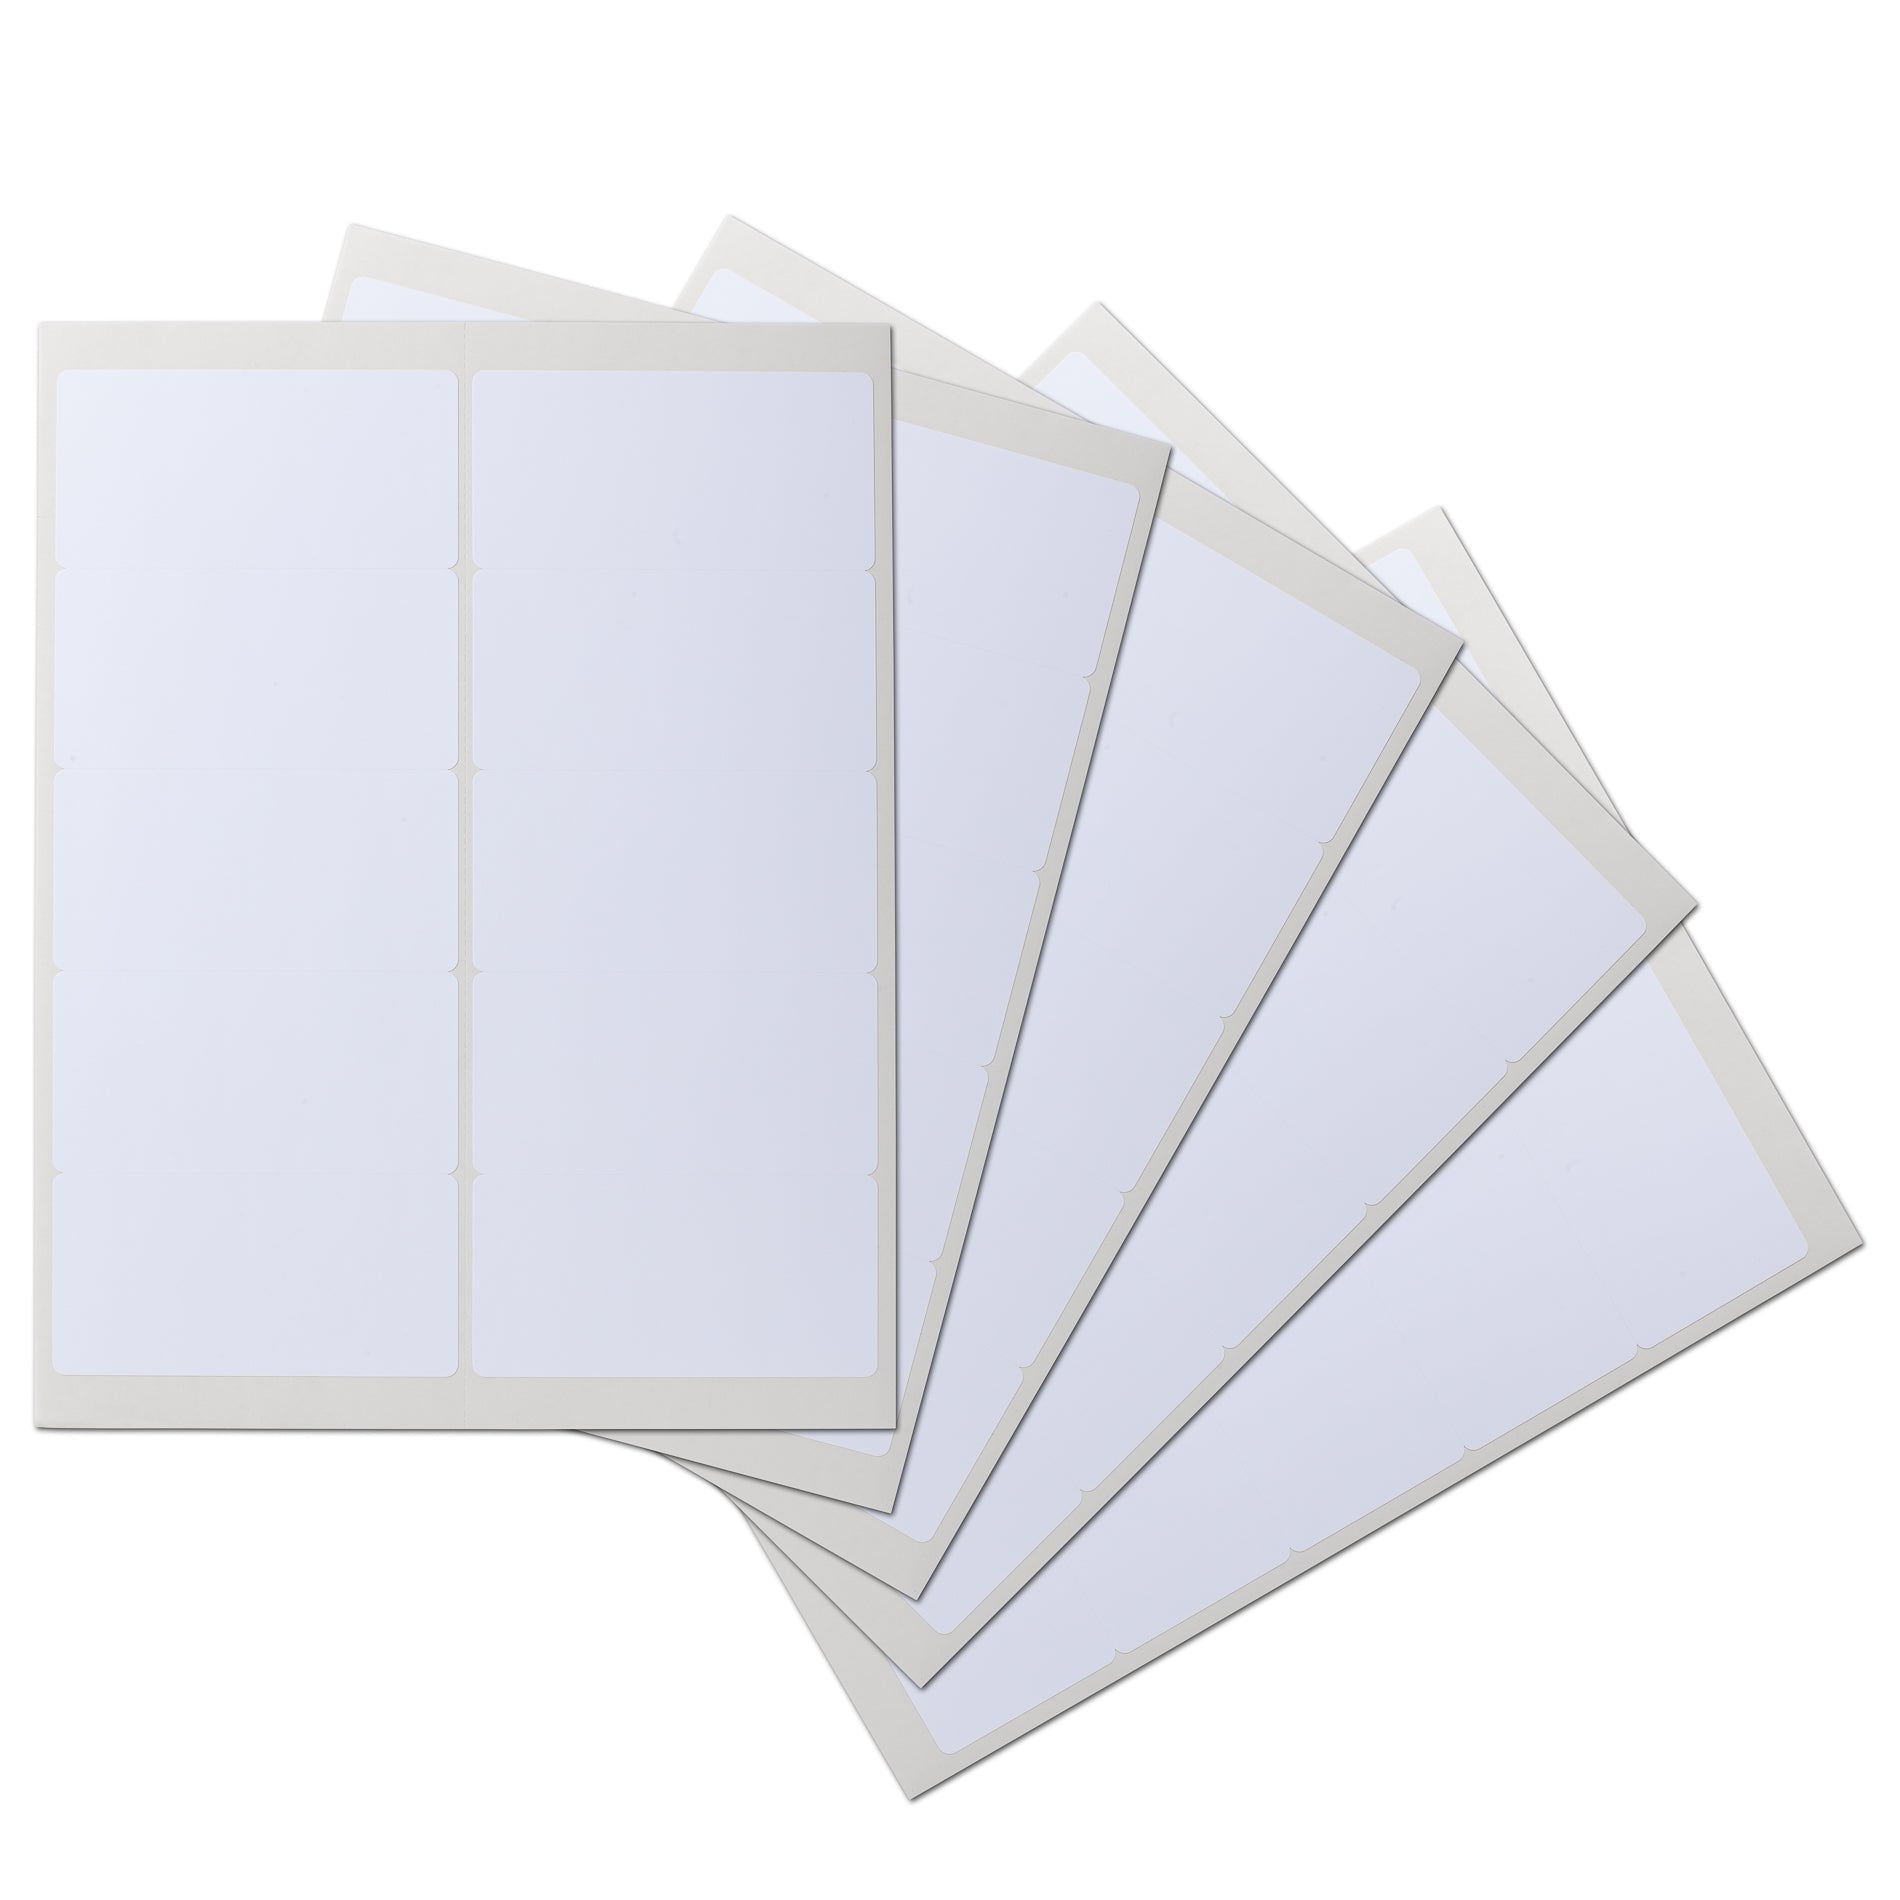 4x2 inch Rectangle Waterproof Labels